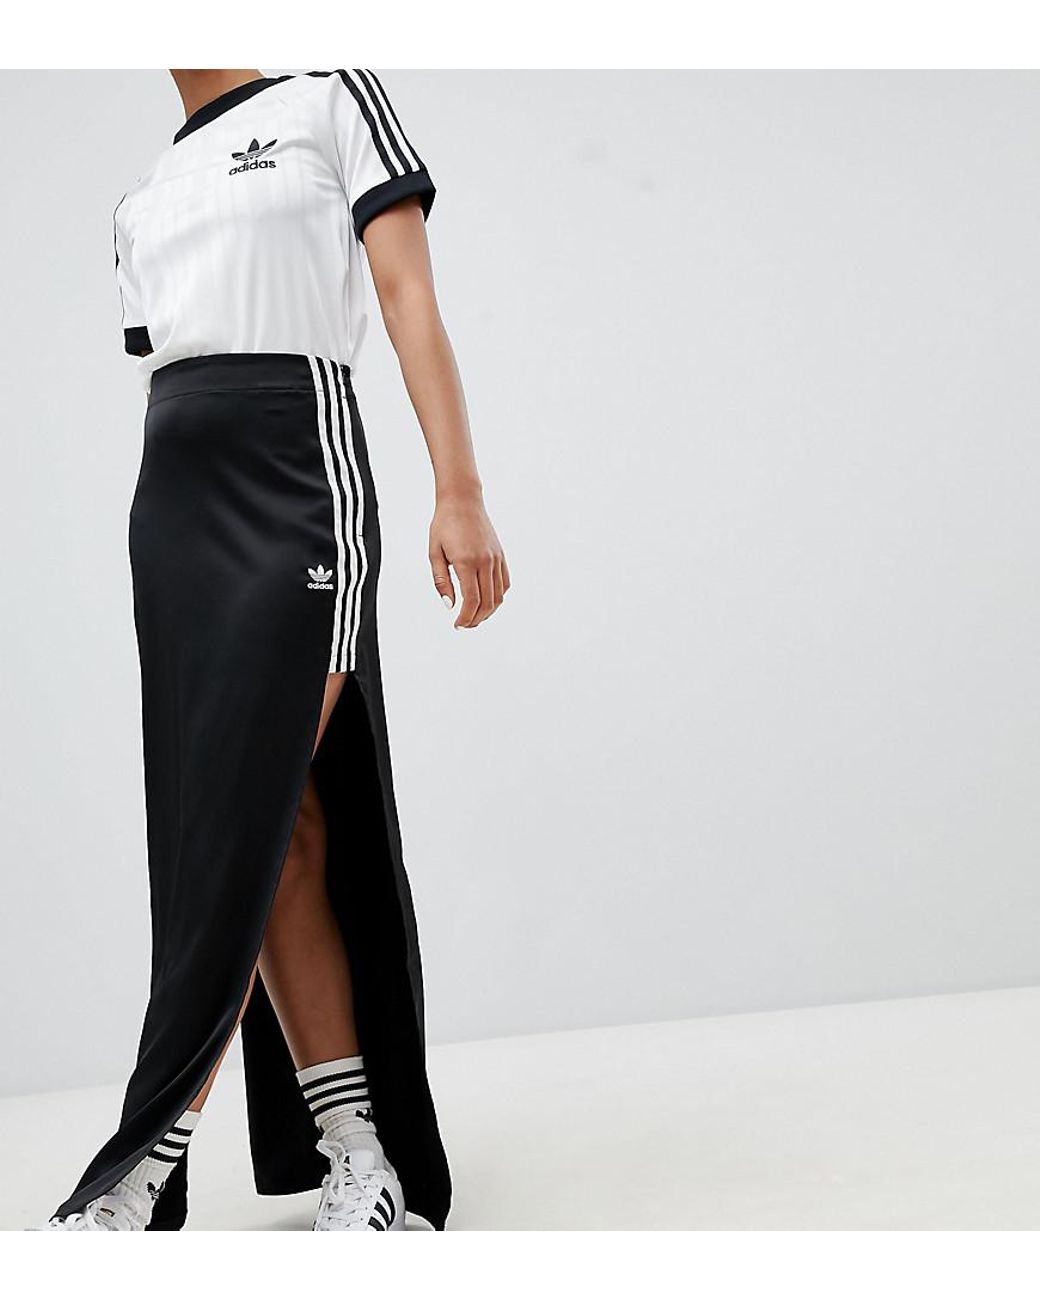 adidas Originals Fashion League Maxi Skirt With Extreme Slit in Black |  Lyst Canada